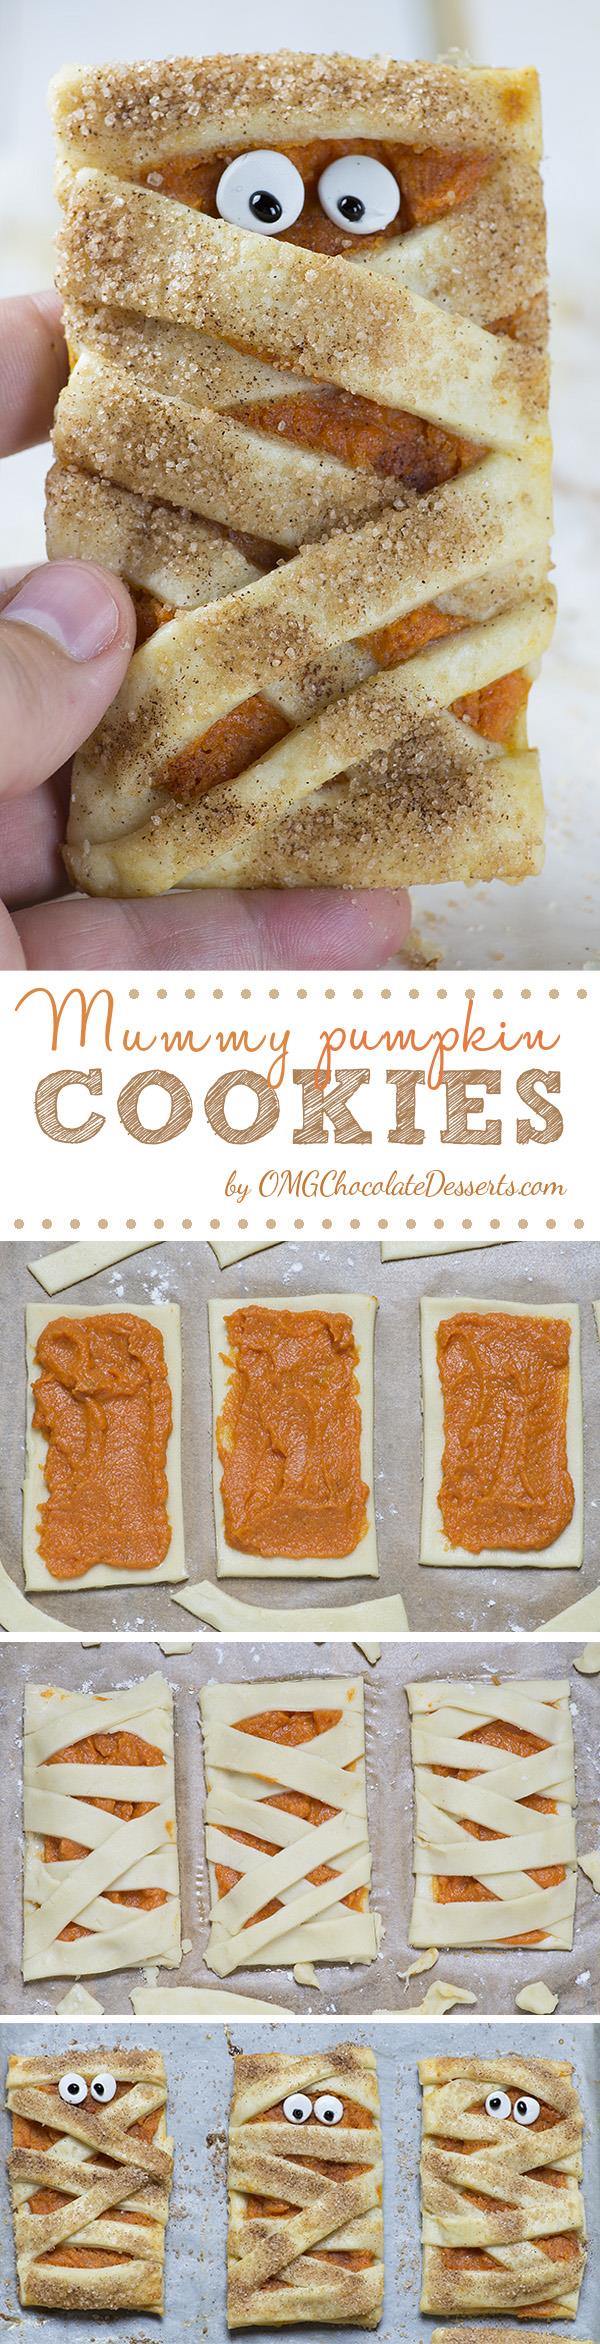 If you want a beautiful treat in the shape of frightening mummies for the upcoming Halloween, then these Mummy Pumpkin Cookies will be as much about fun as about taste.